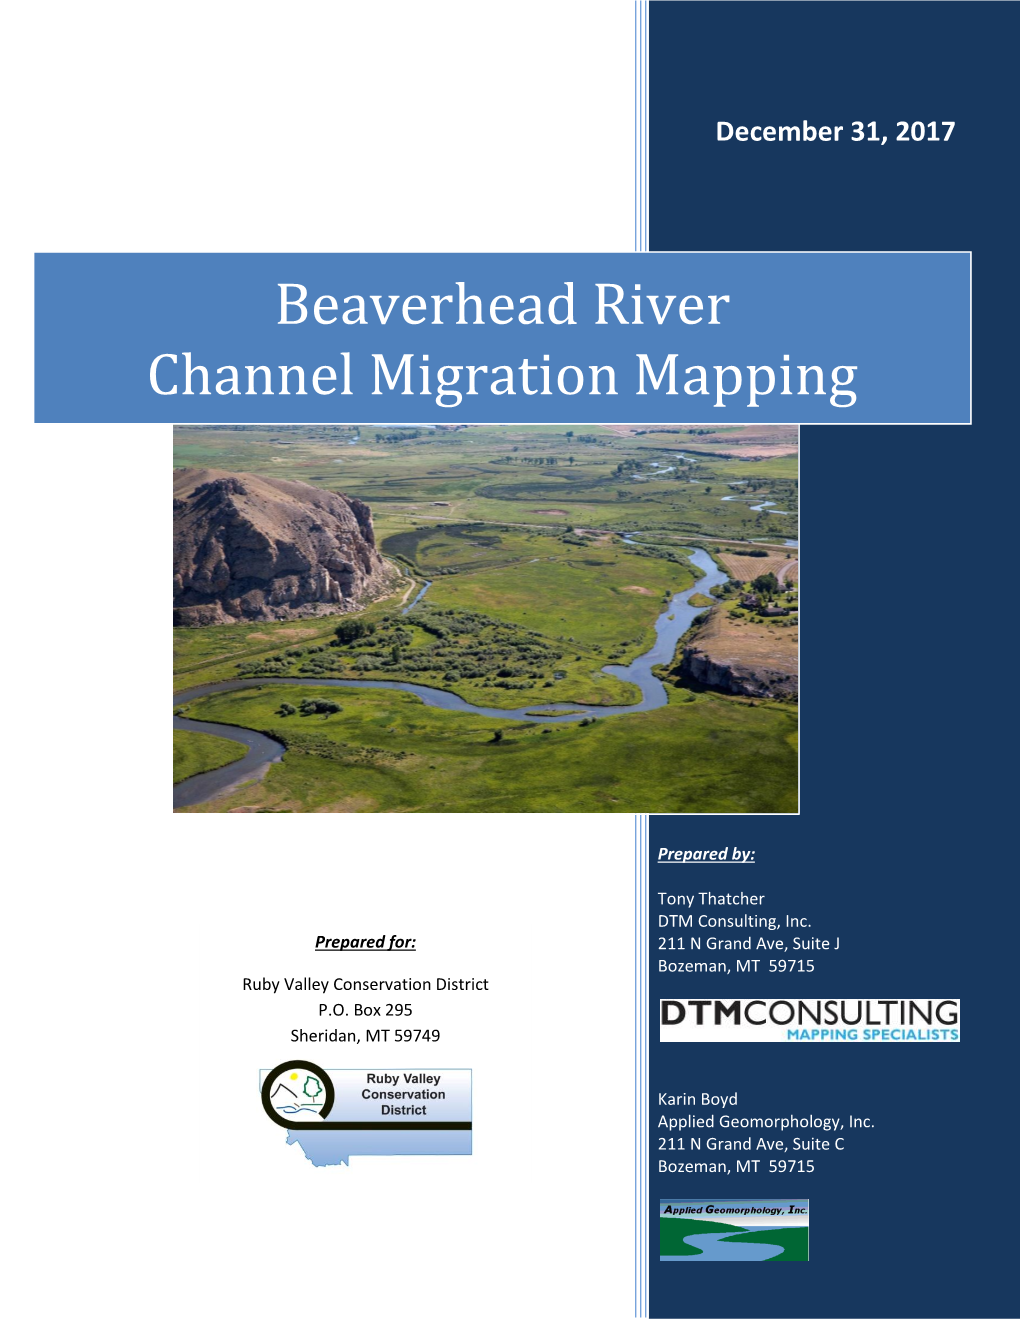 Beaverhead River Channel Migration Mapping